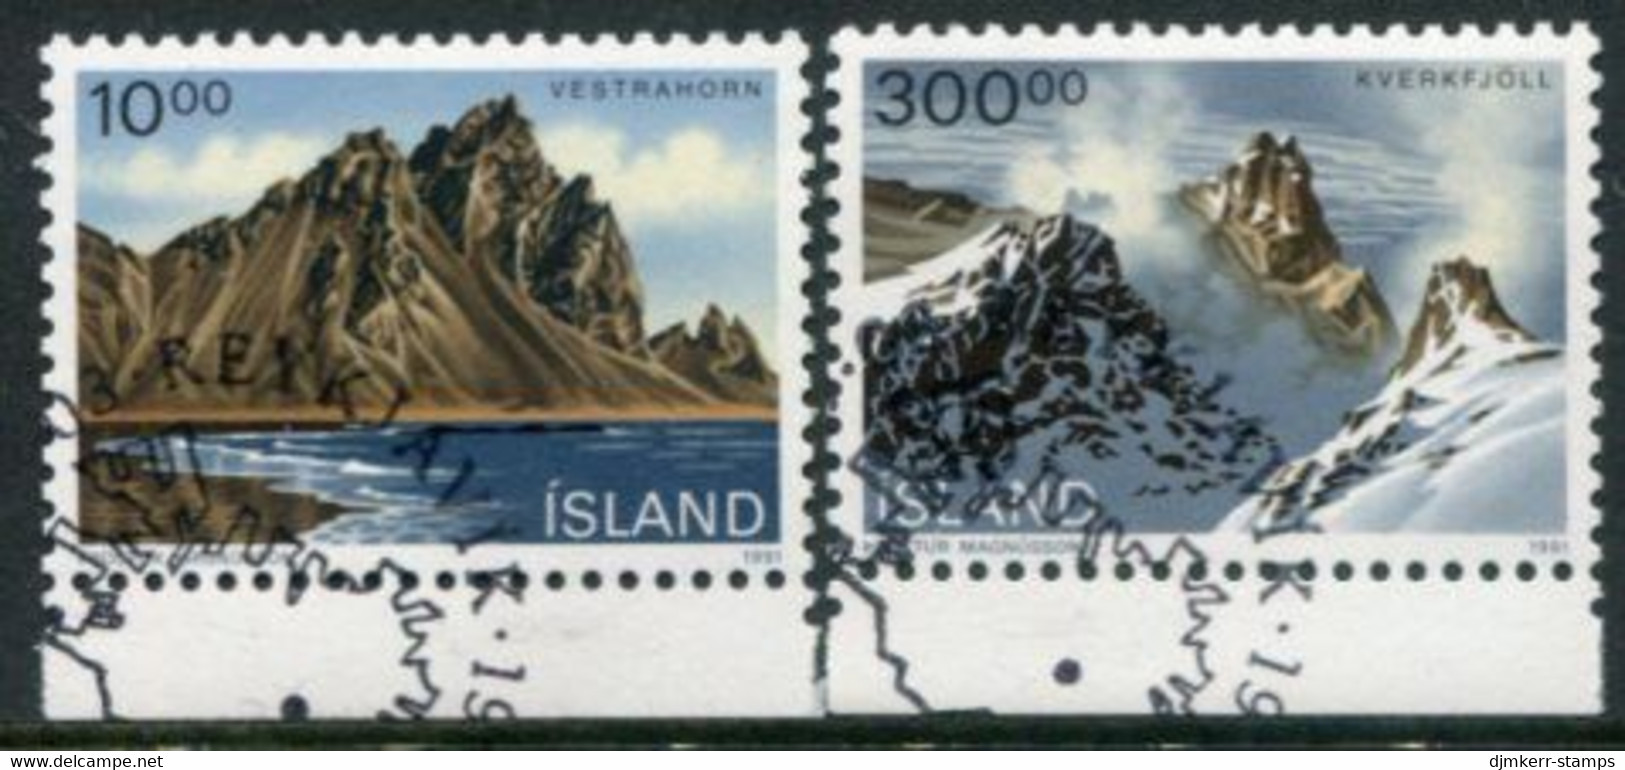 ICELAND 1991 Landscapes Used.  Michel 740-41 - Used Stamps